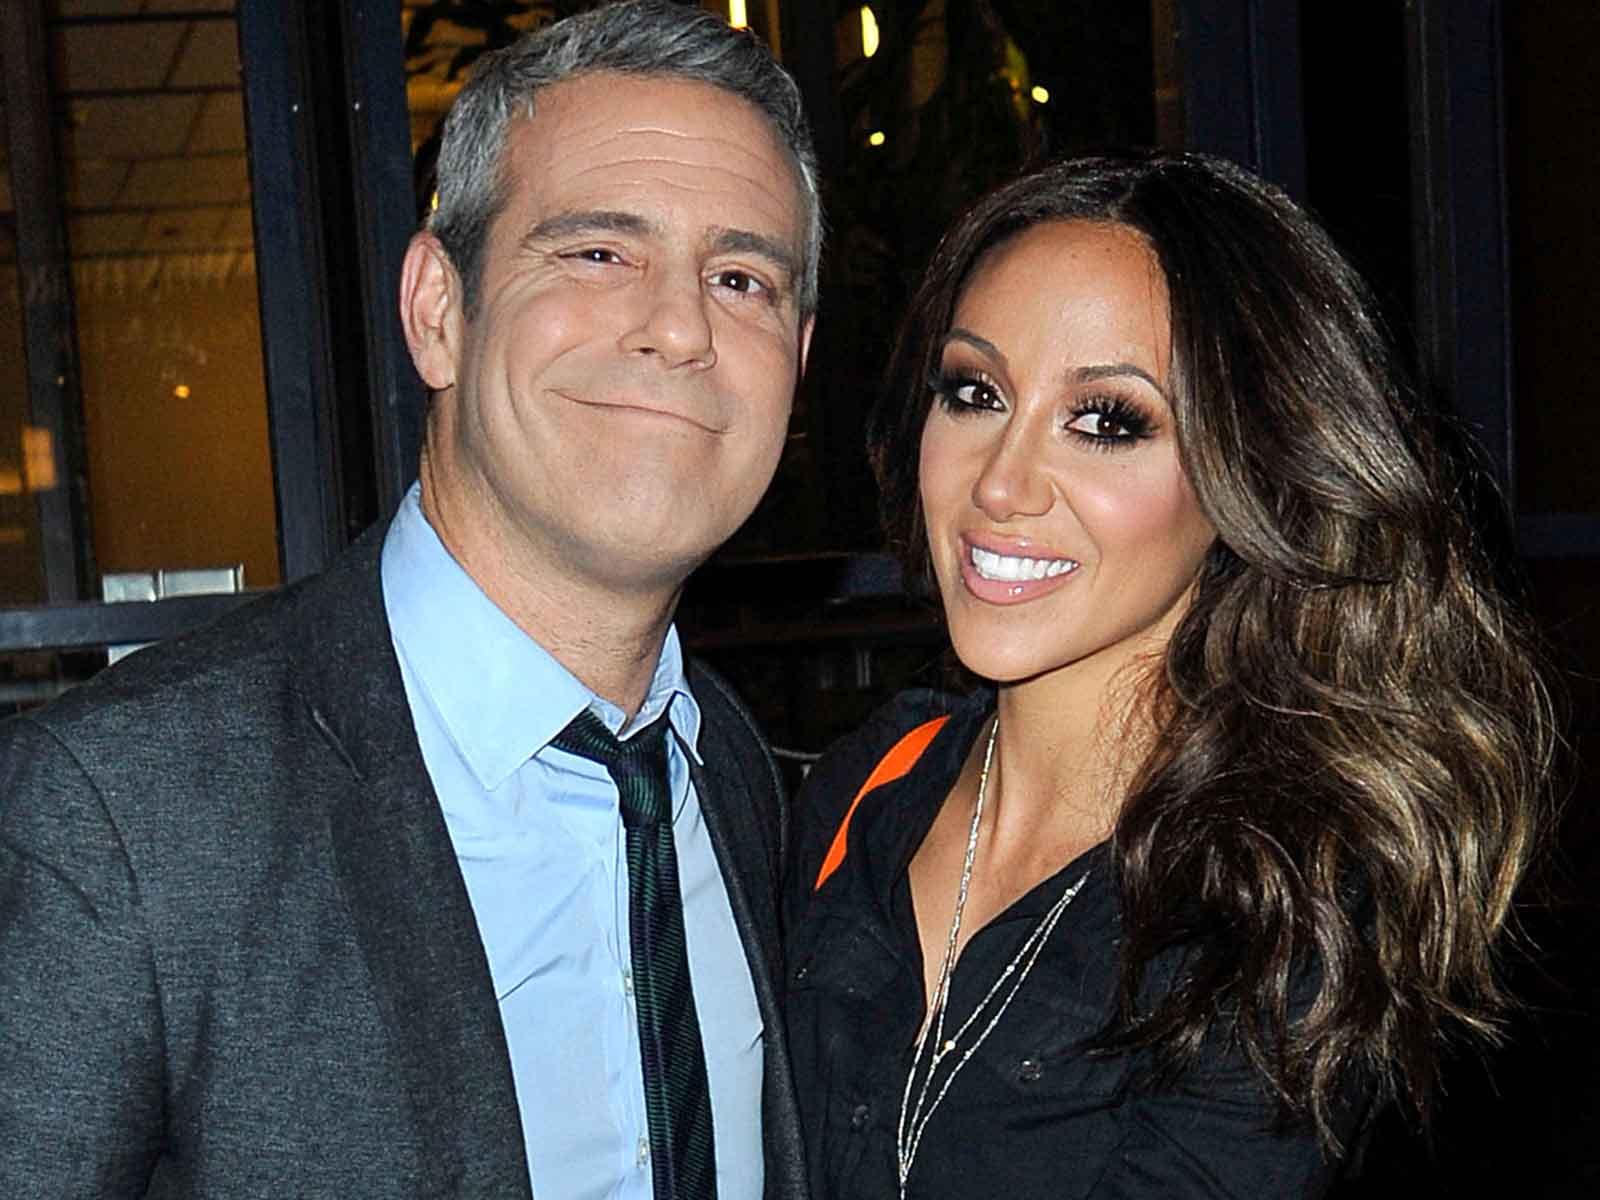 Andy Cohen and Melissa Gorga Claim $30 Million Lawsuit Belongs in Arbitration